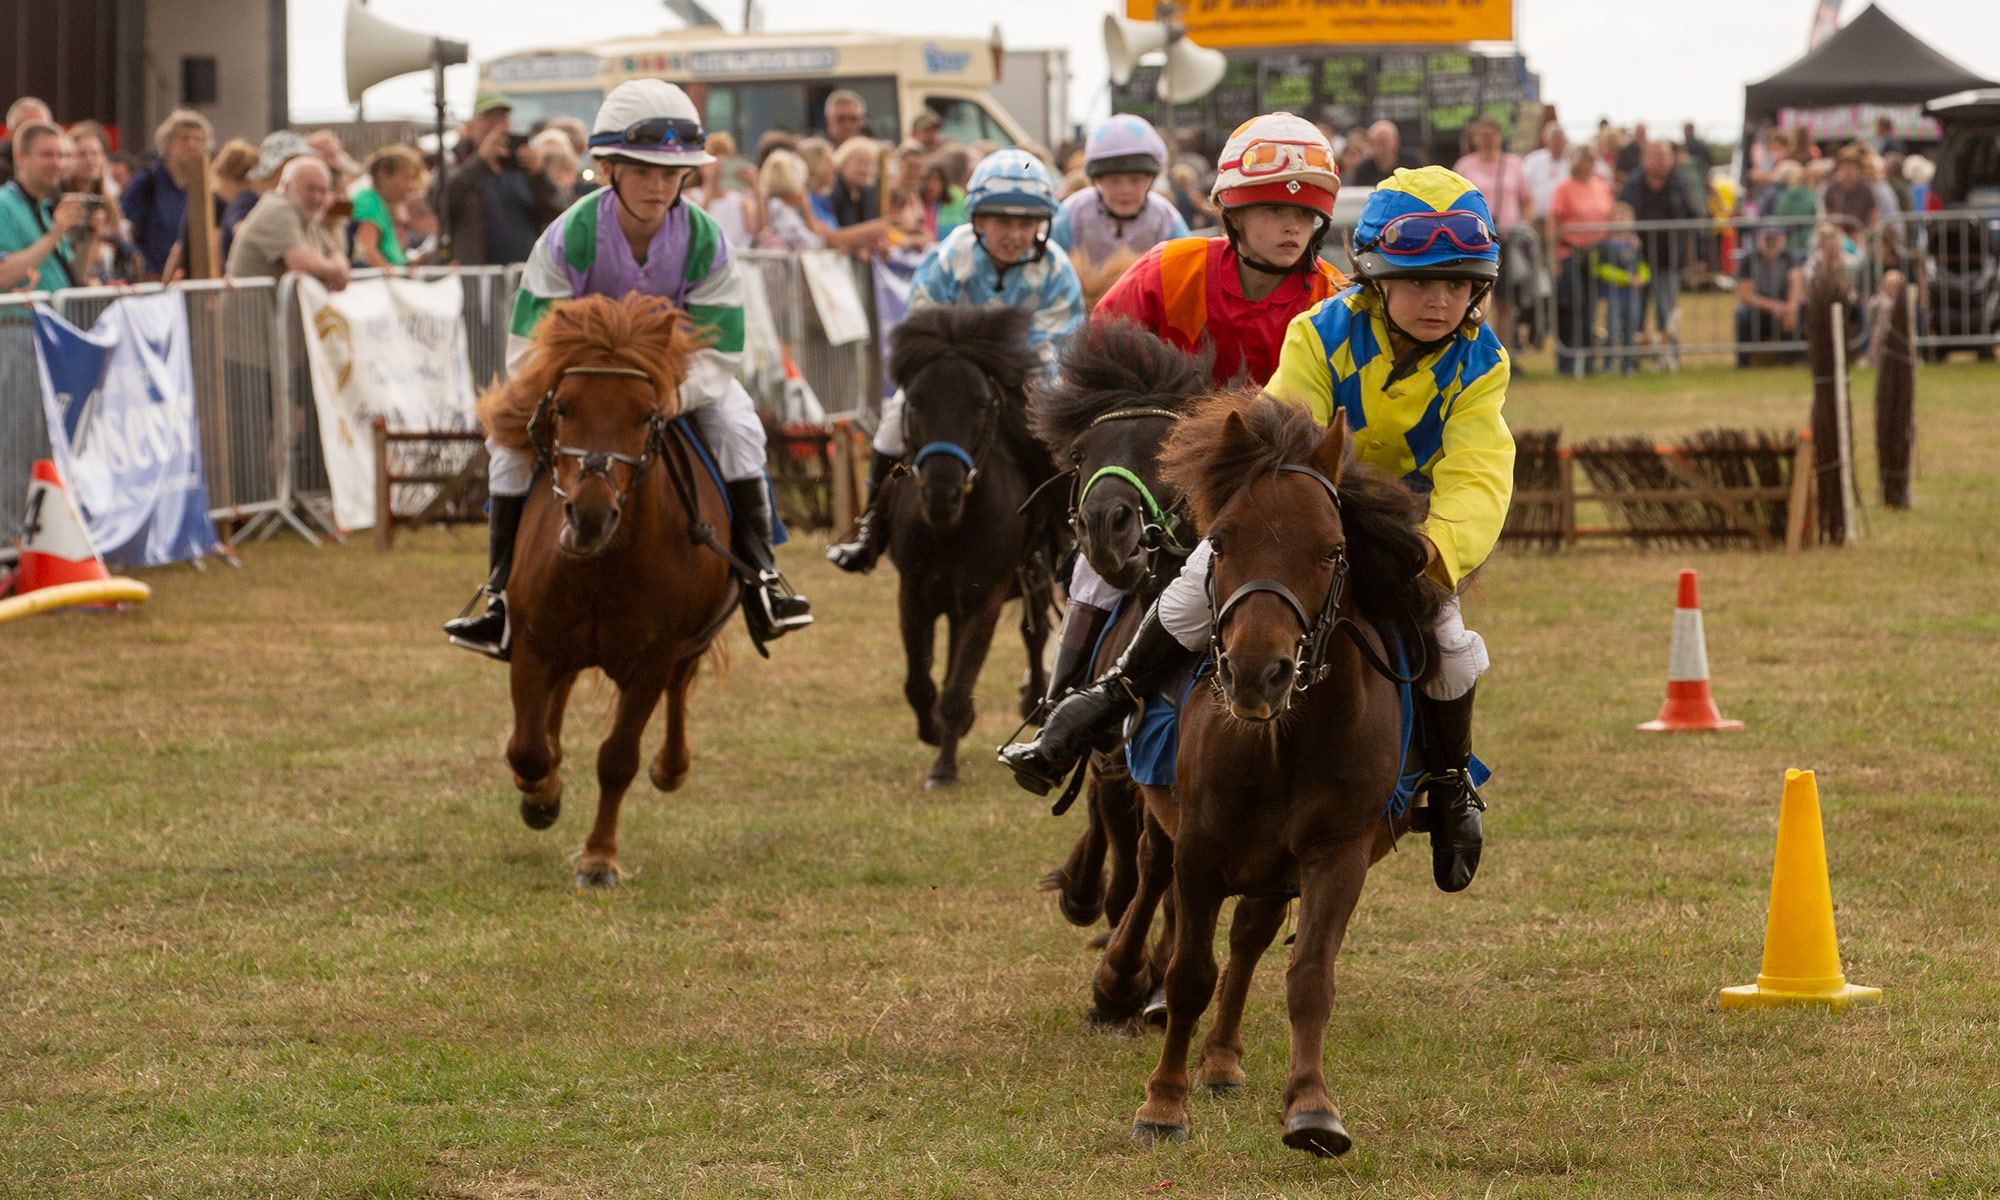 riders rqcing shetland ponies on a course